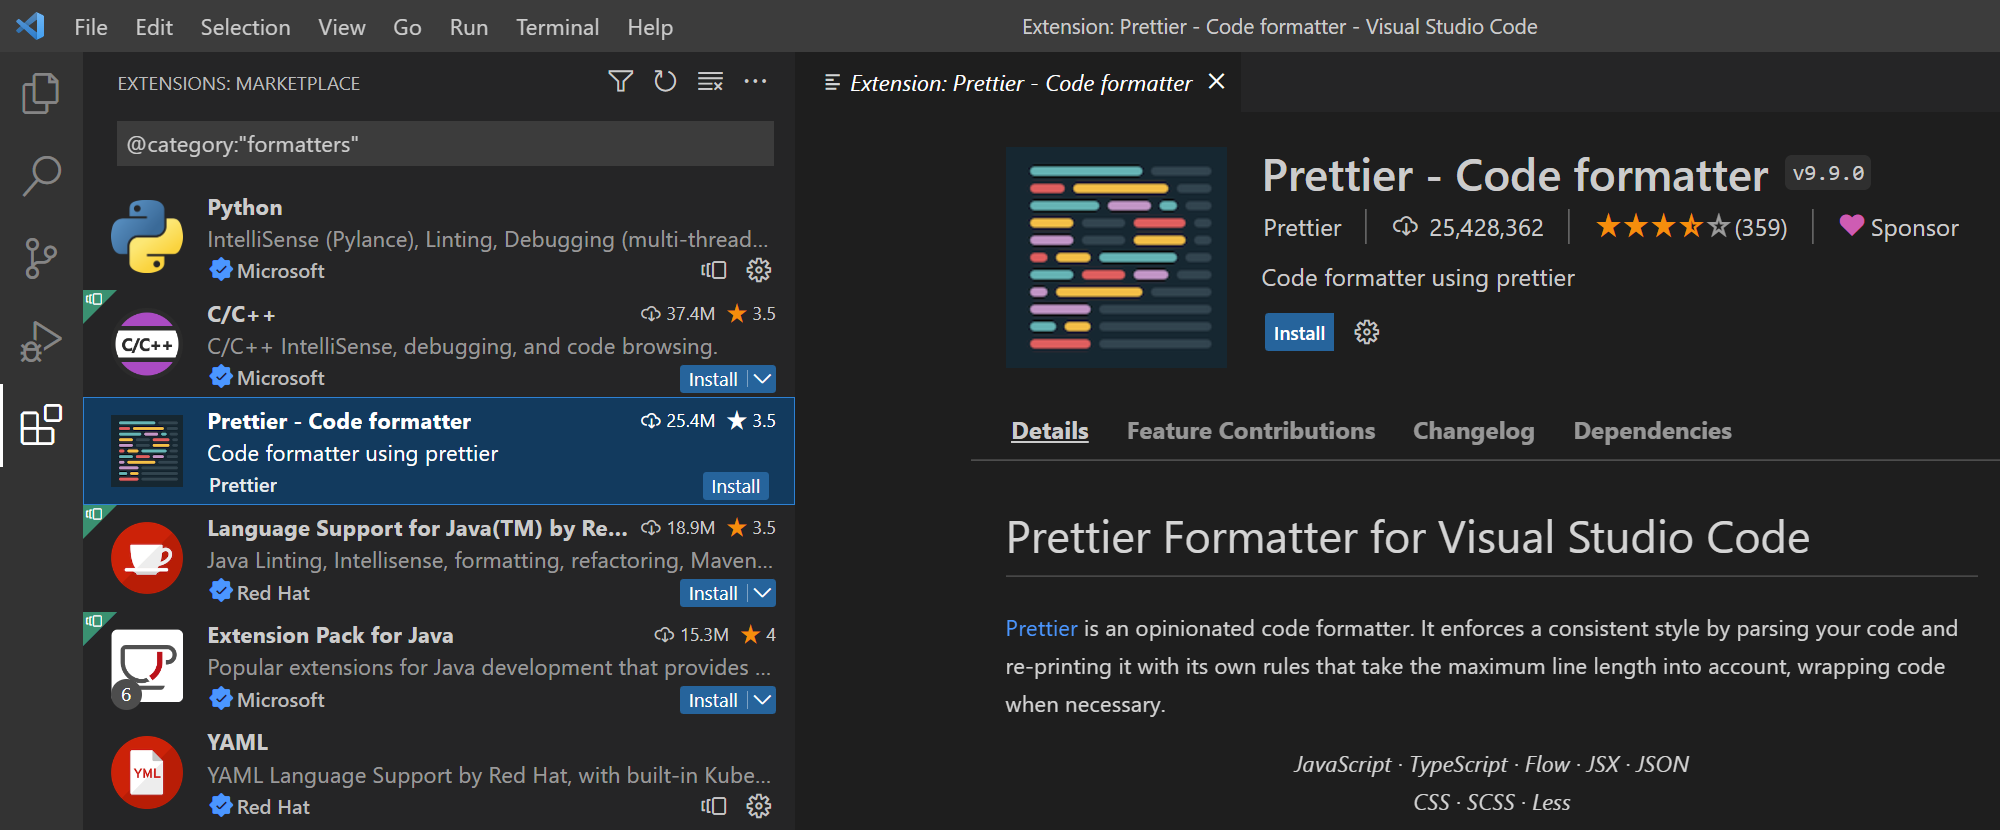 Screenshot of Visual Studio Code with the Extensions Marketplace view displayed and the Prettier extension in view.